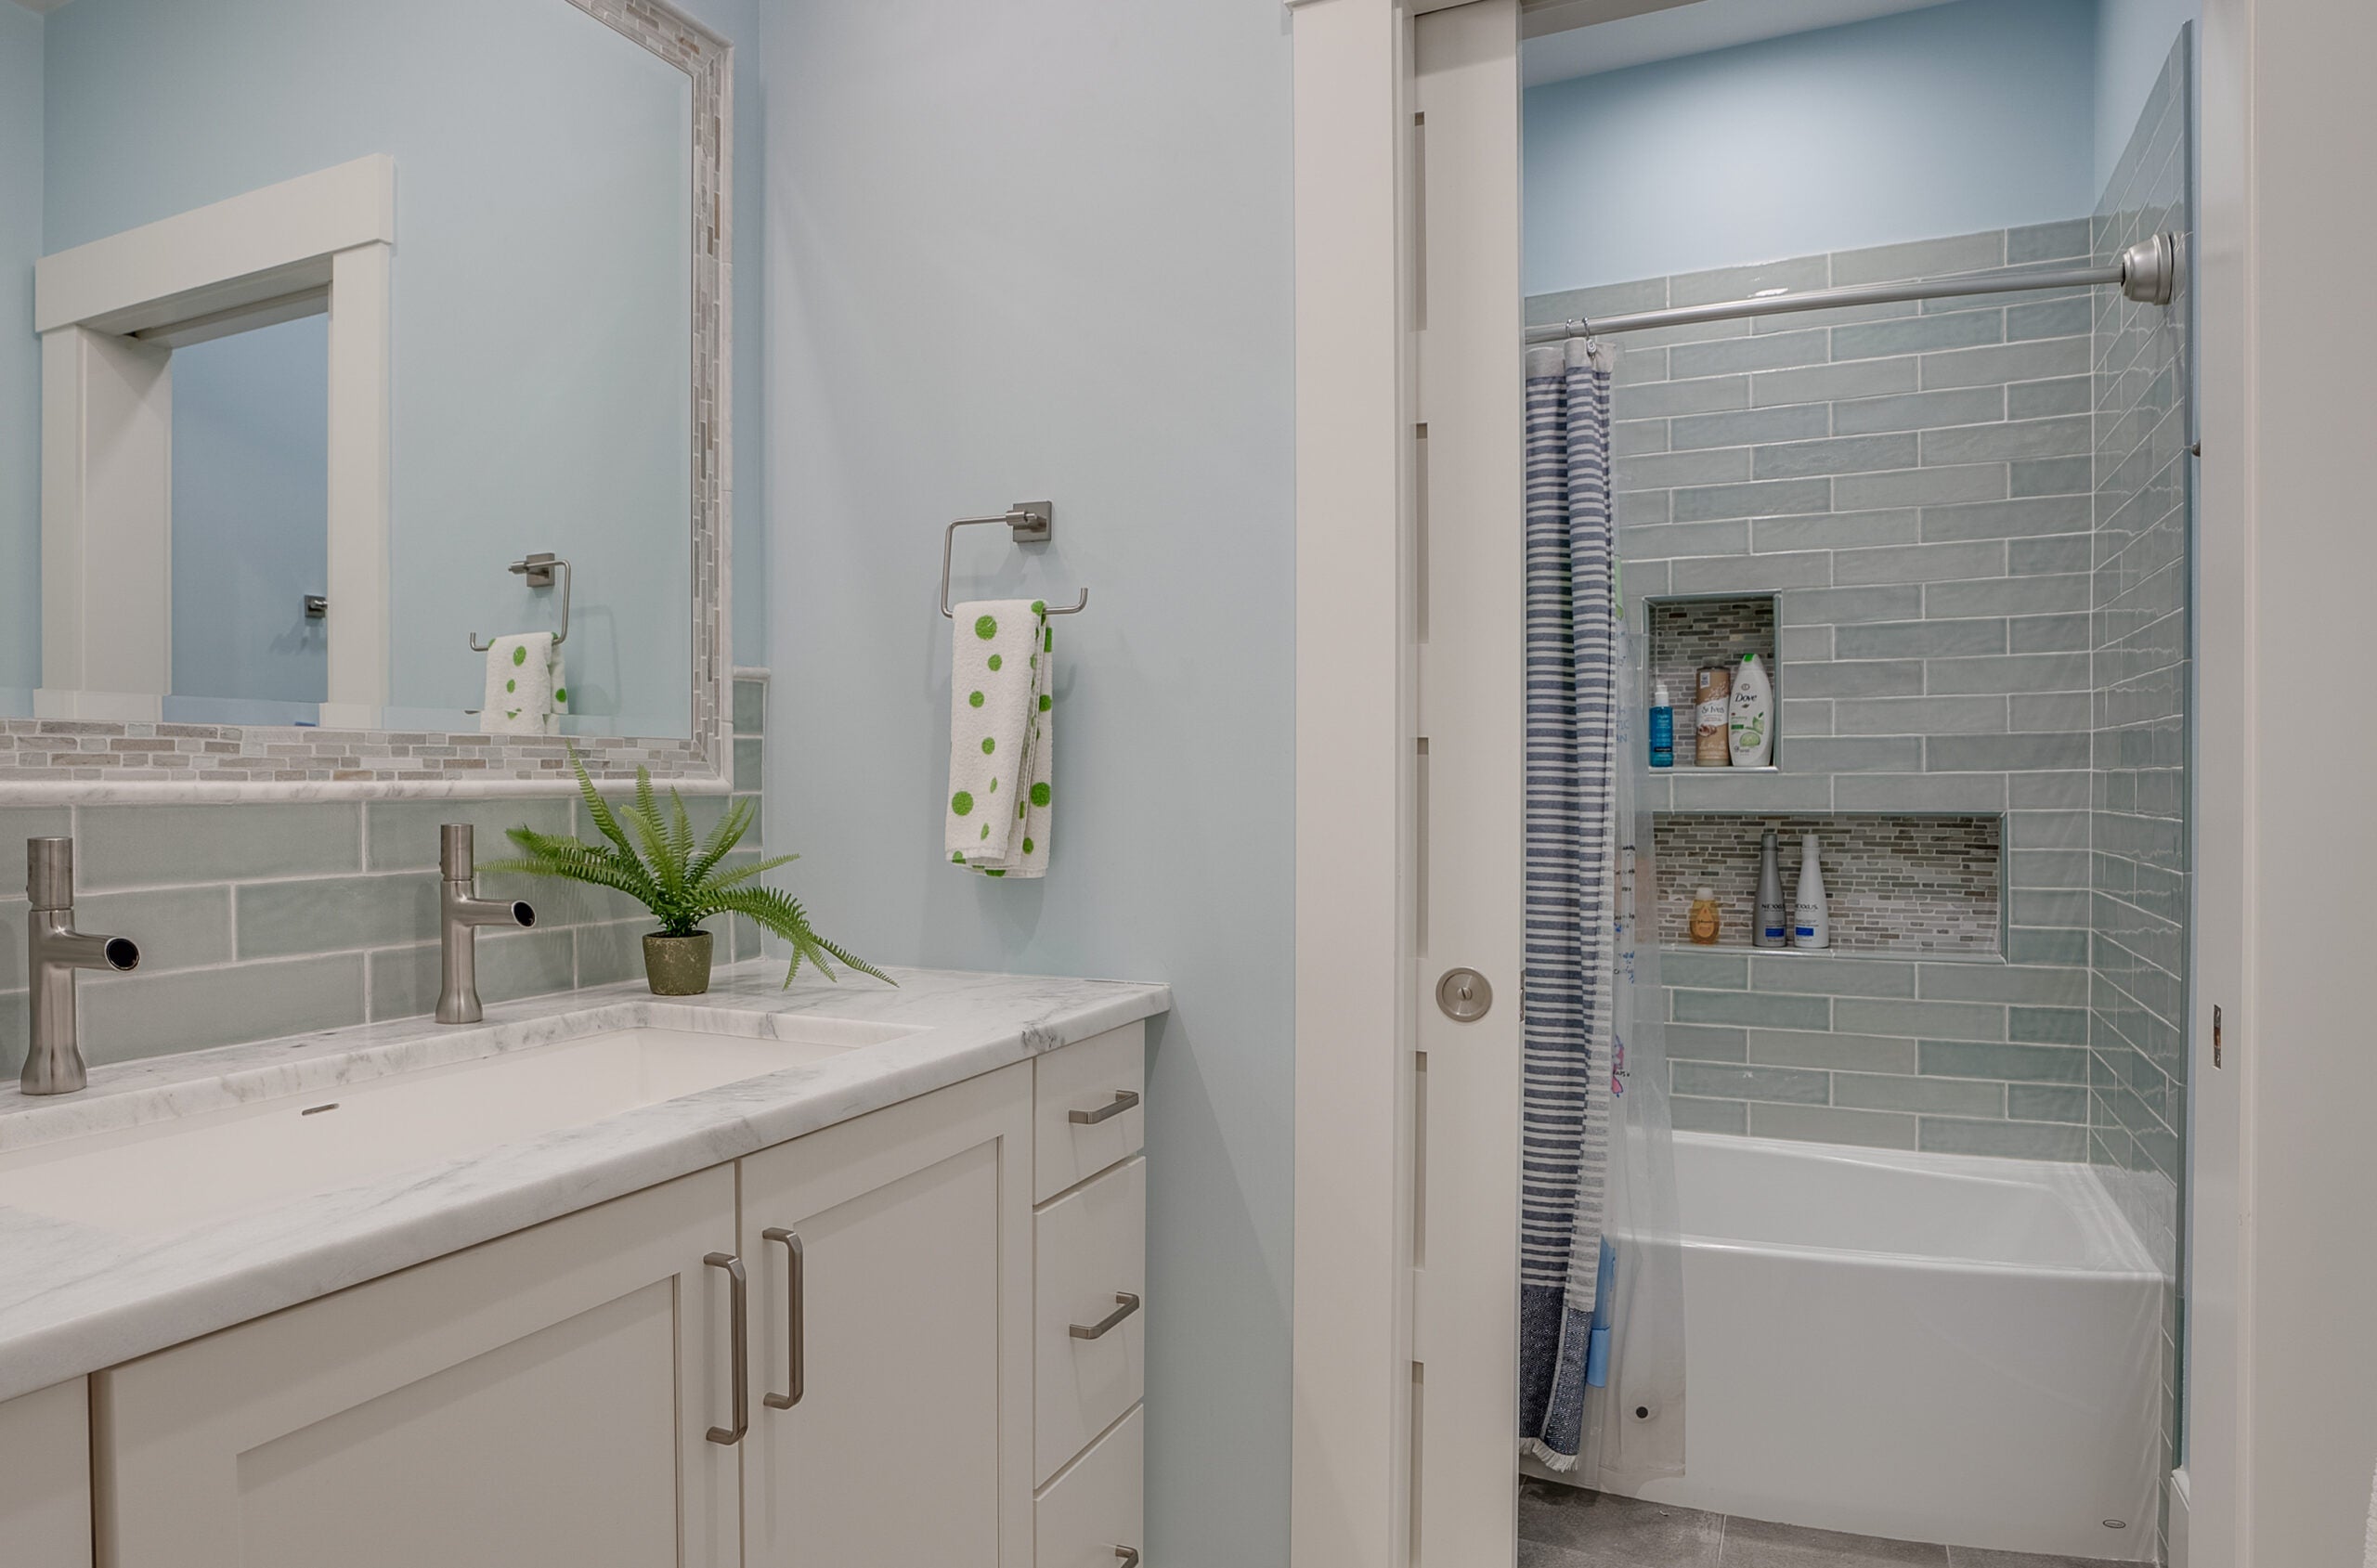 A bathroom with a trough sink, two faucets, and a pocket door that opens to reveal a tub/shower combination with a shower curtain and tile backsplash.